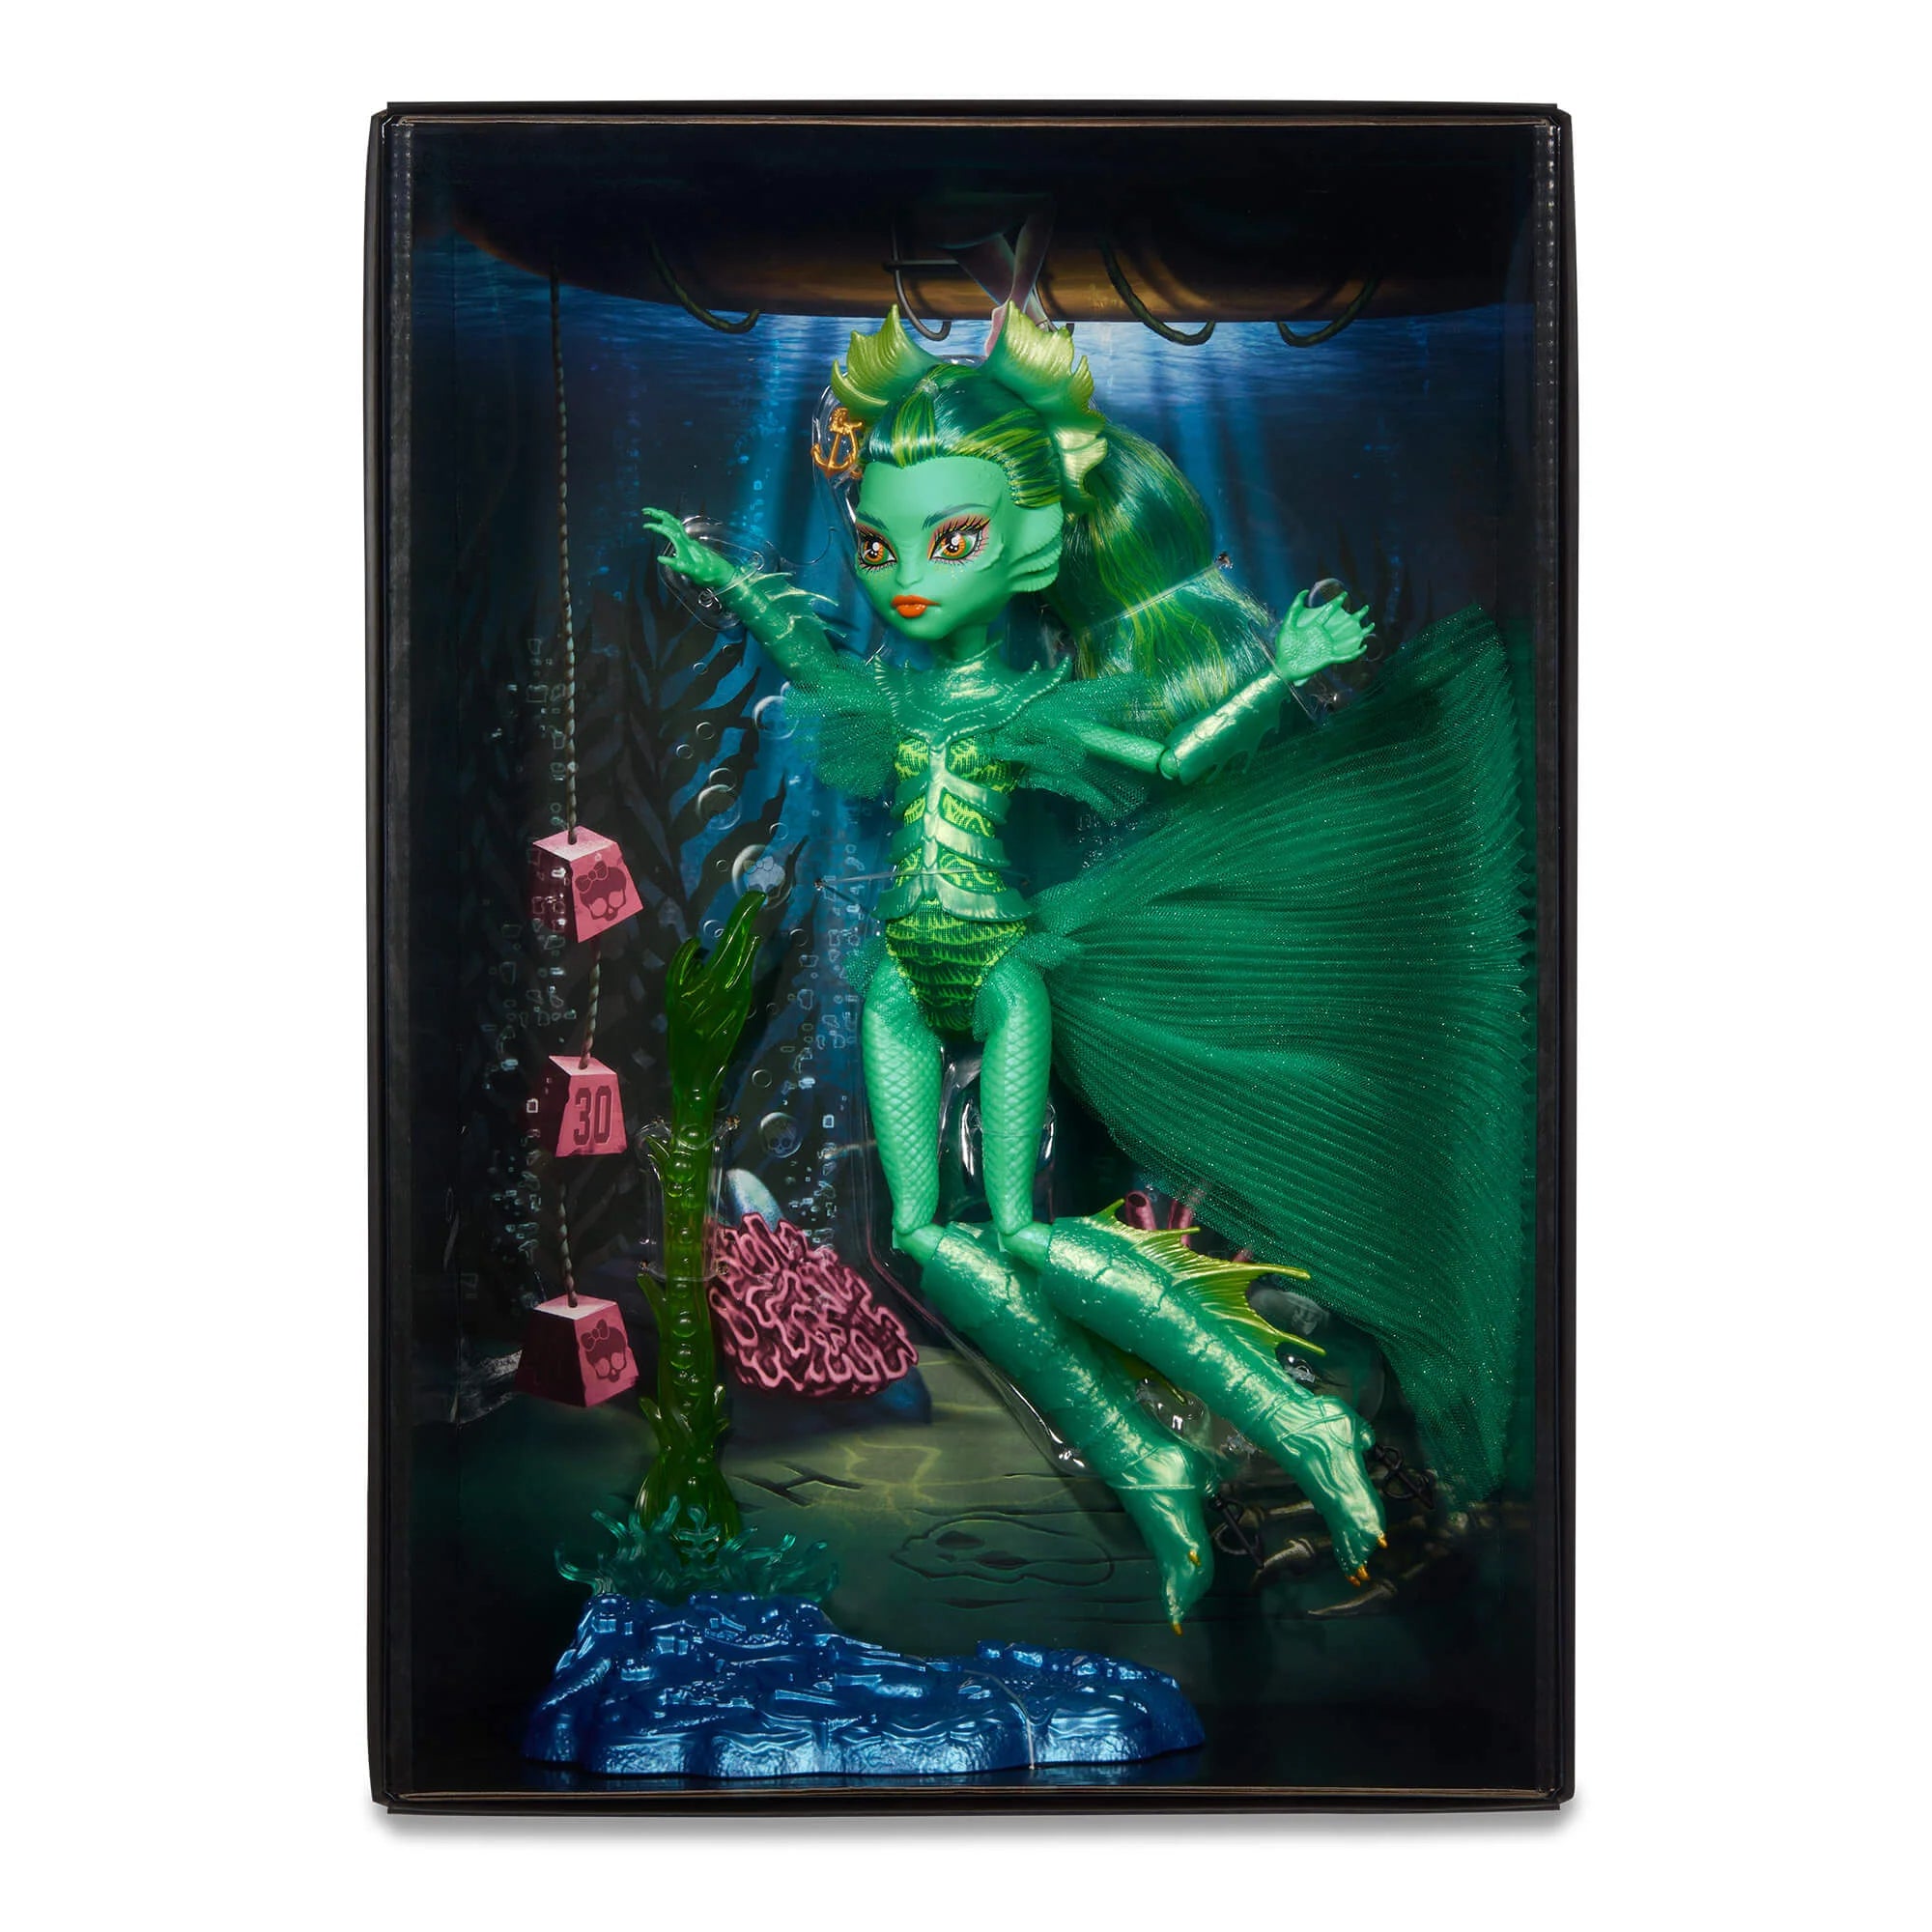 IN STOCK! Monster High Skullector - Creature from The Black Lagoon Doll